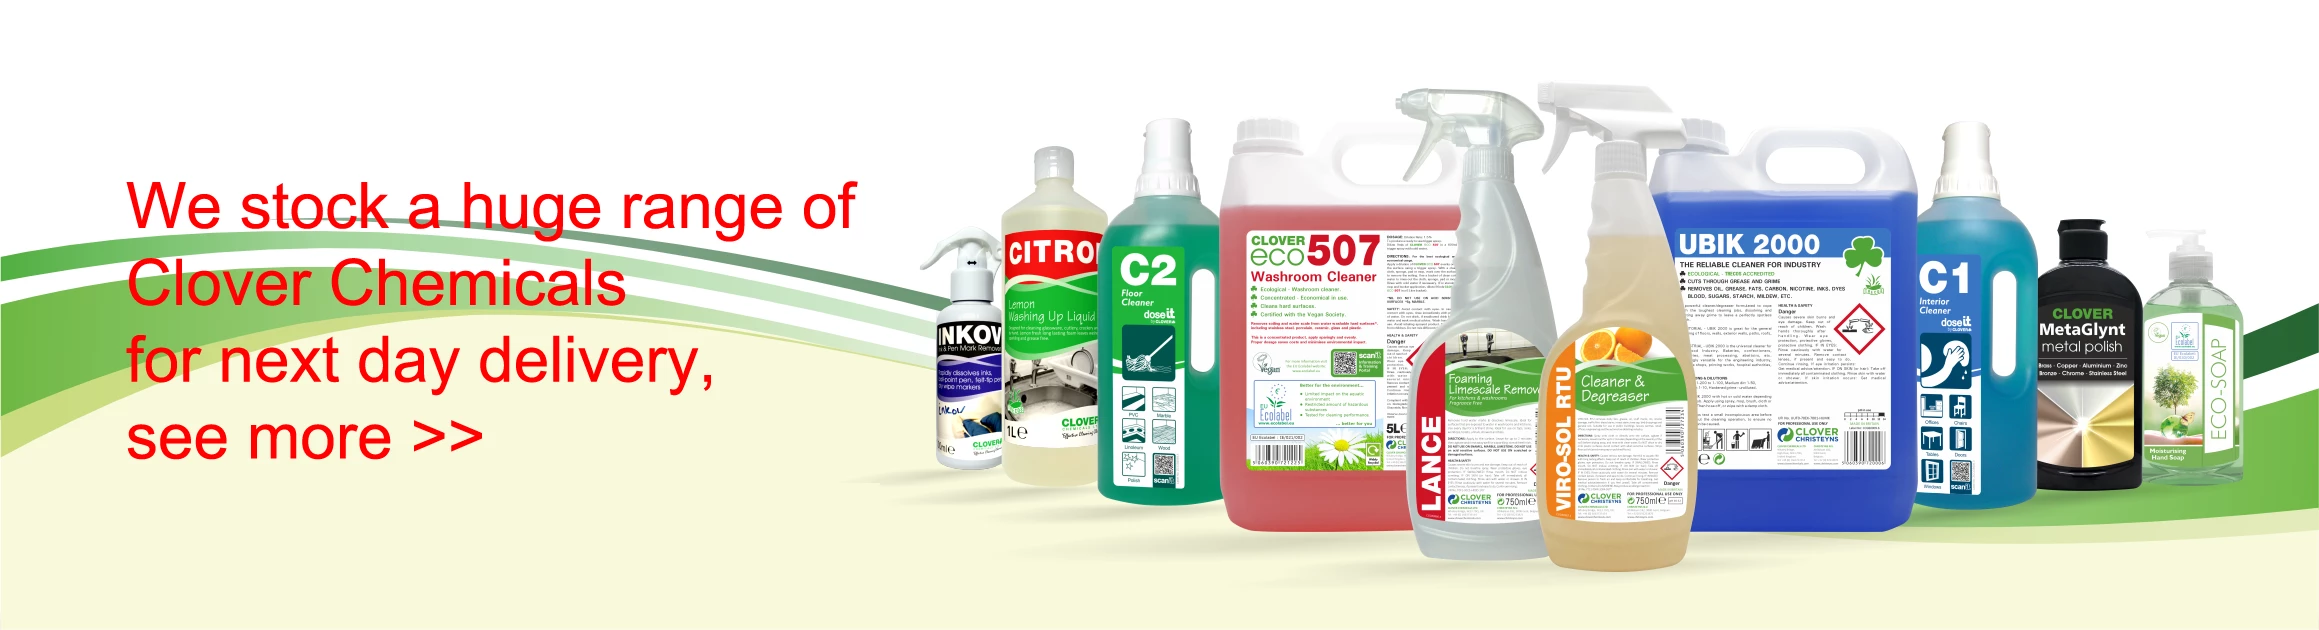 Clover Chemicals by Cleaning Products